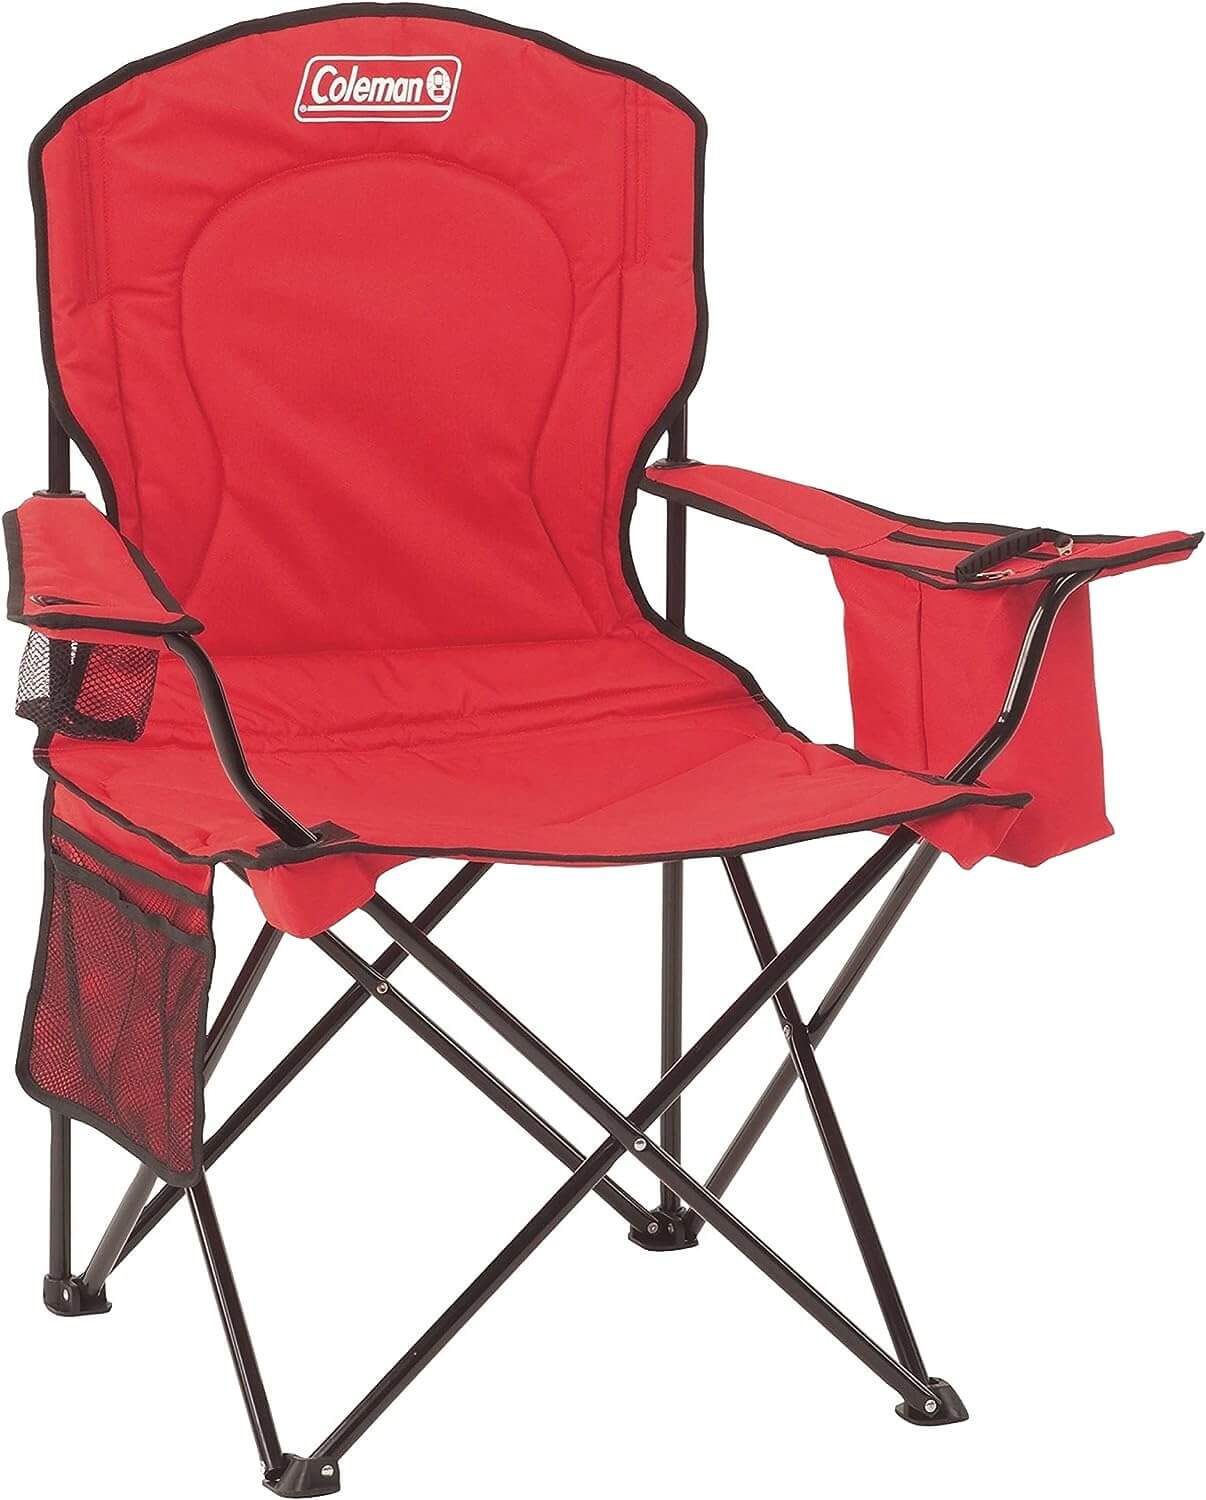 Coleman Portable Camping Quad Chair with Cooler